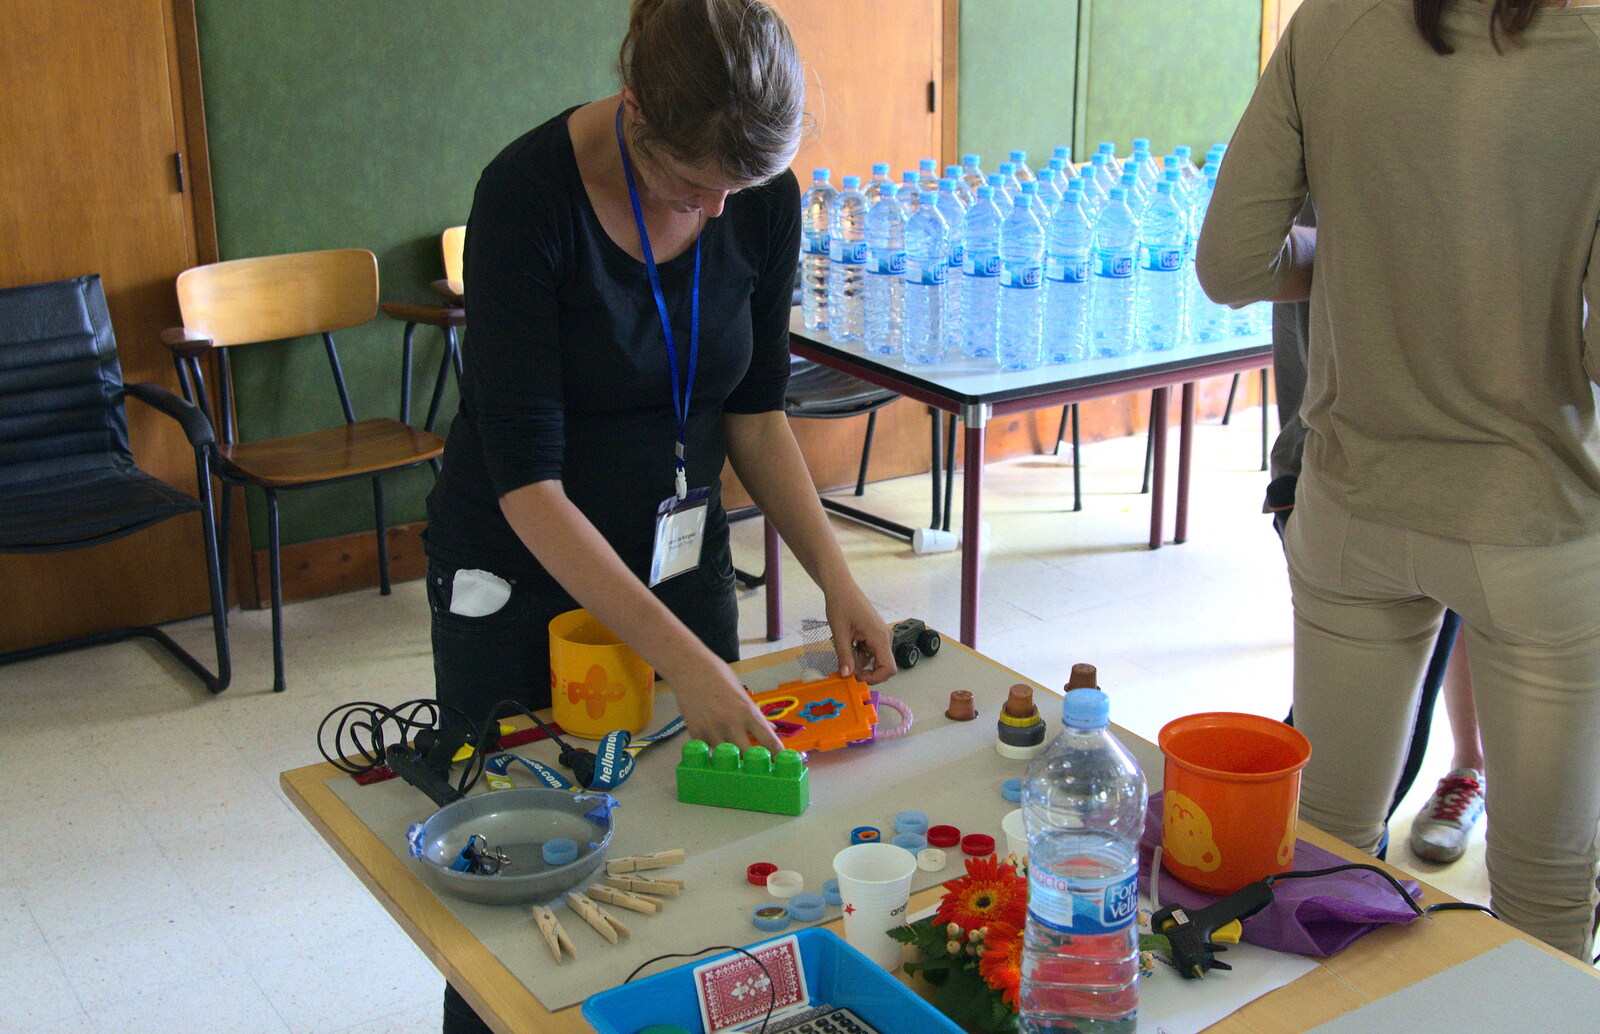 Isobel gets down to making stuff from The Open Education Challenge, Barcelona, Catalonia - 13th July 2014